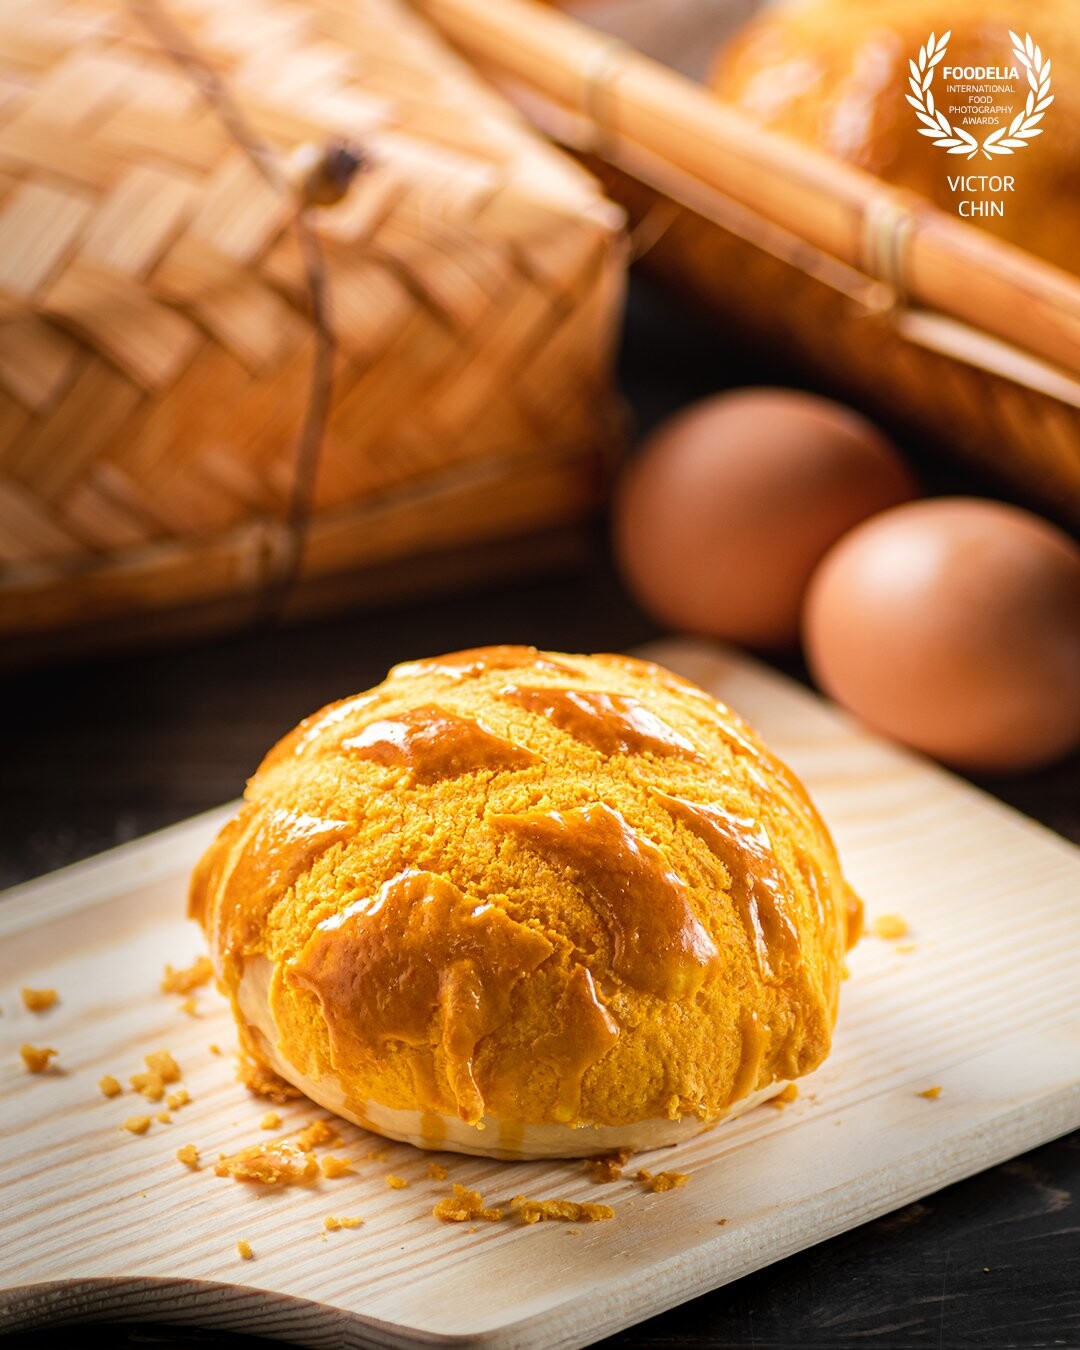 Polo bun is an authentic cuisine from Hong Kong. Shot this for a local bakery in Malaysia for marketing purpose. Total 3 lights setup with grid.